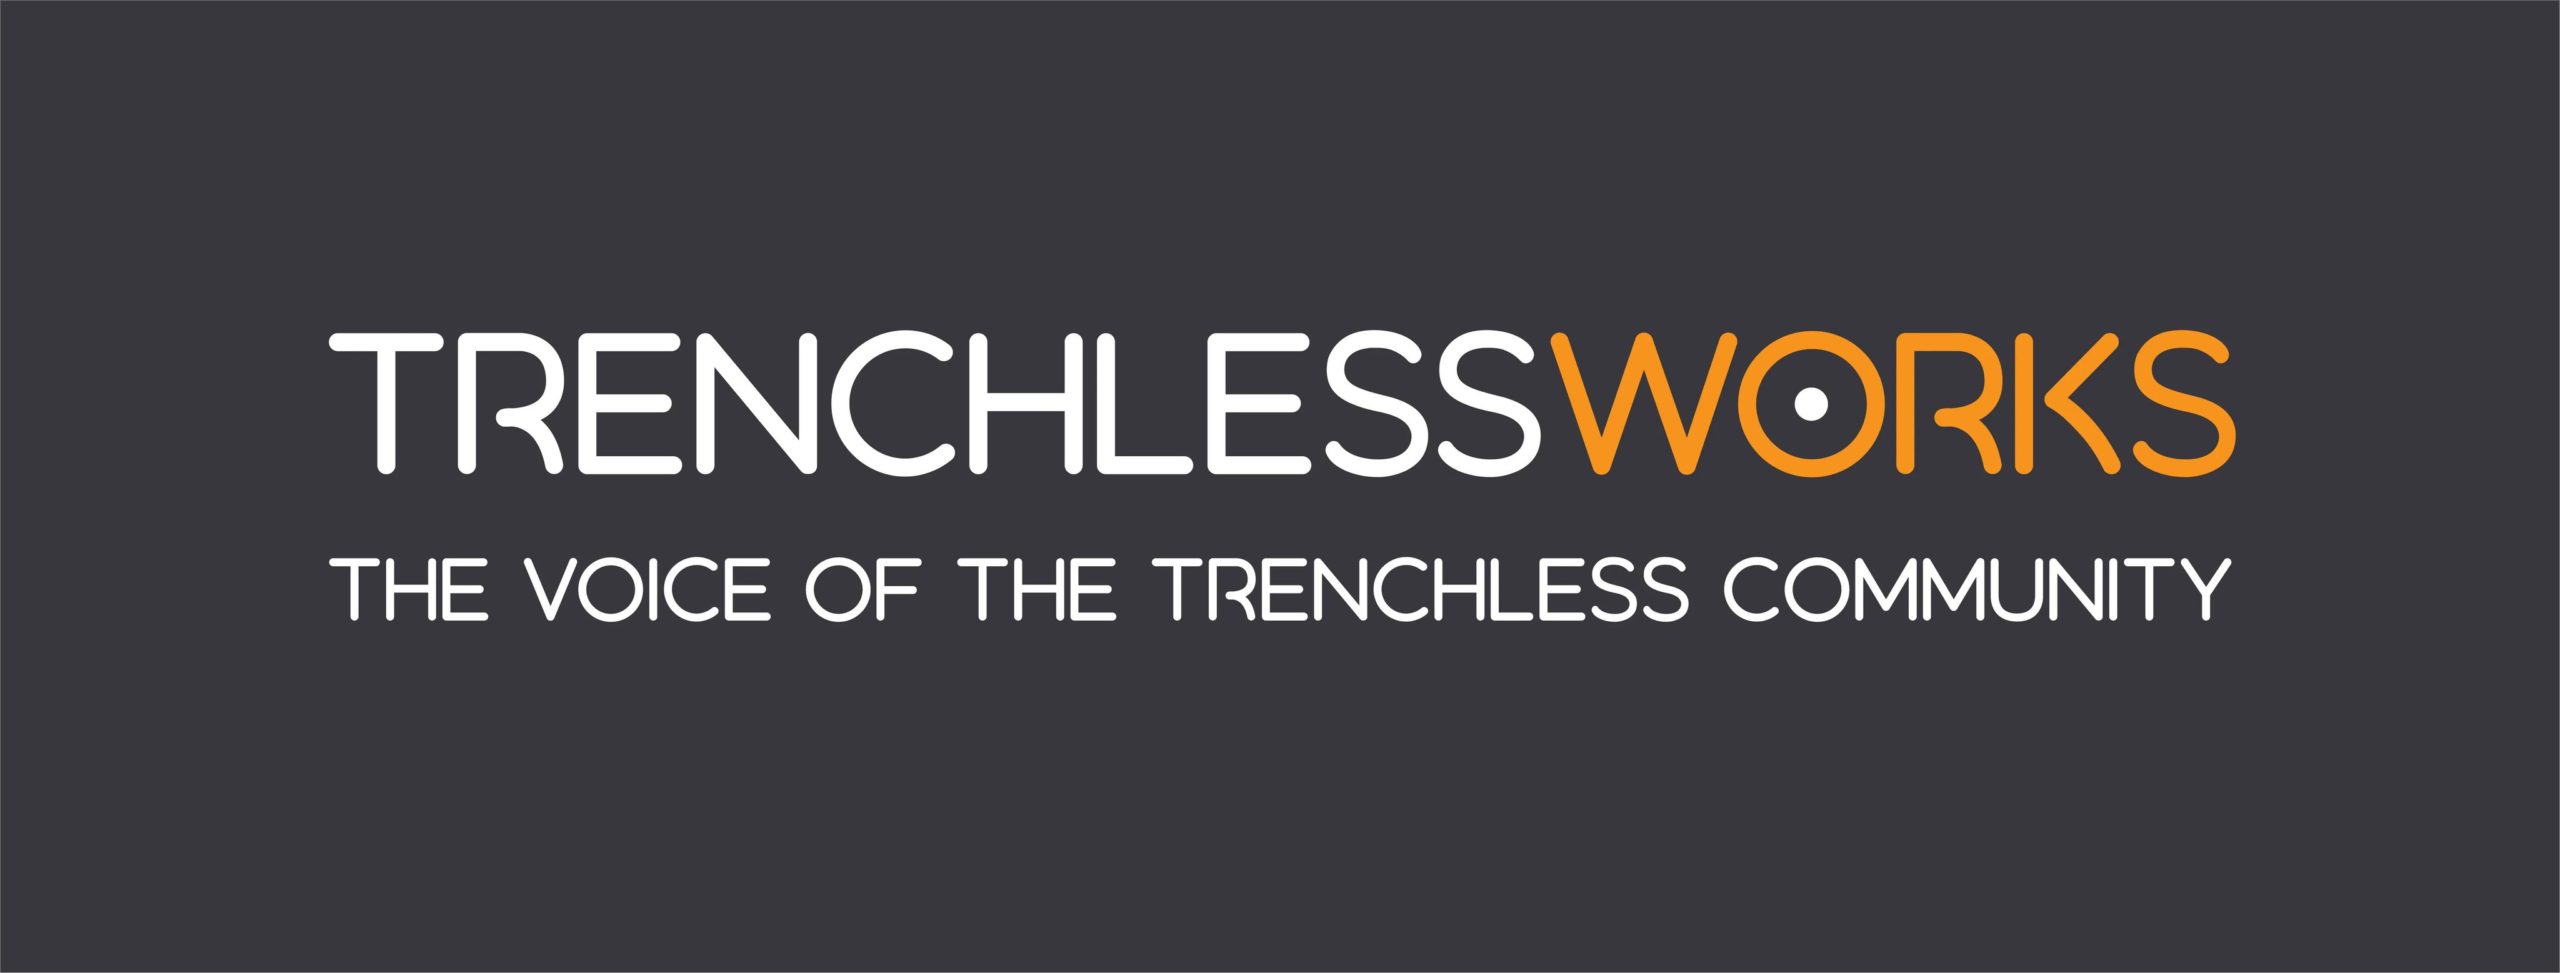 TRENCHLESS WORKS